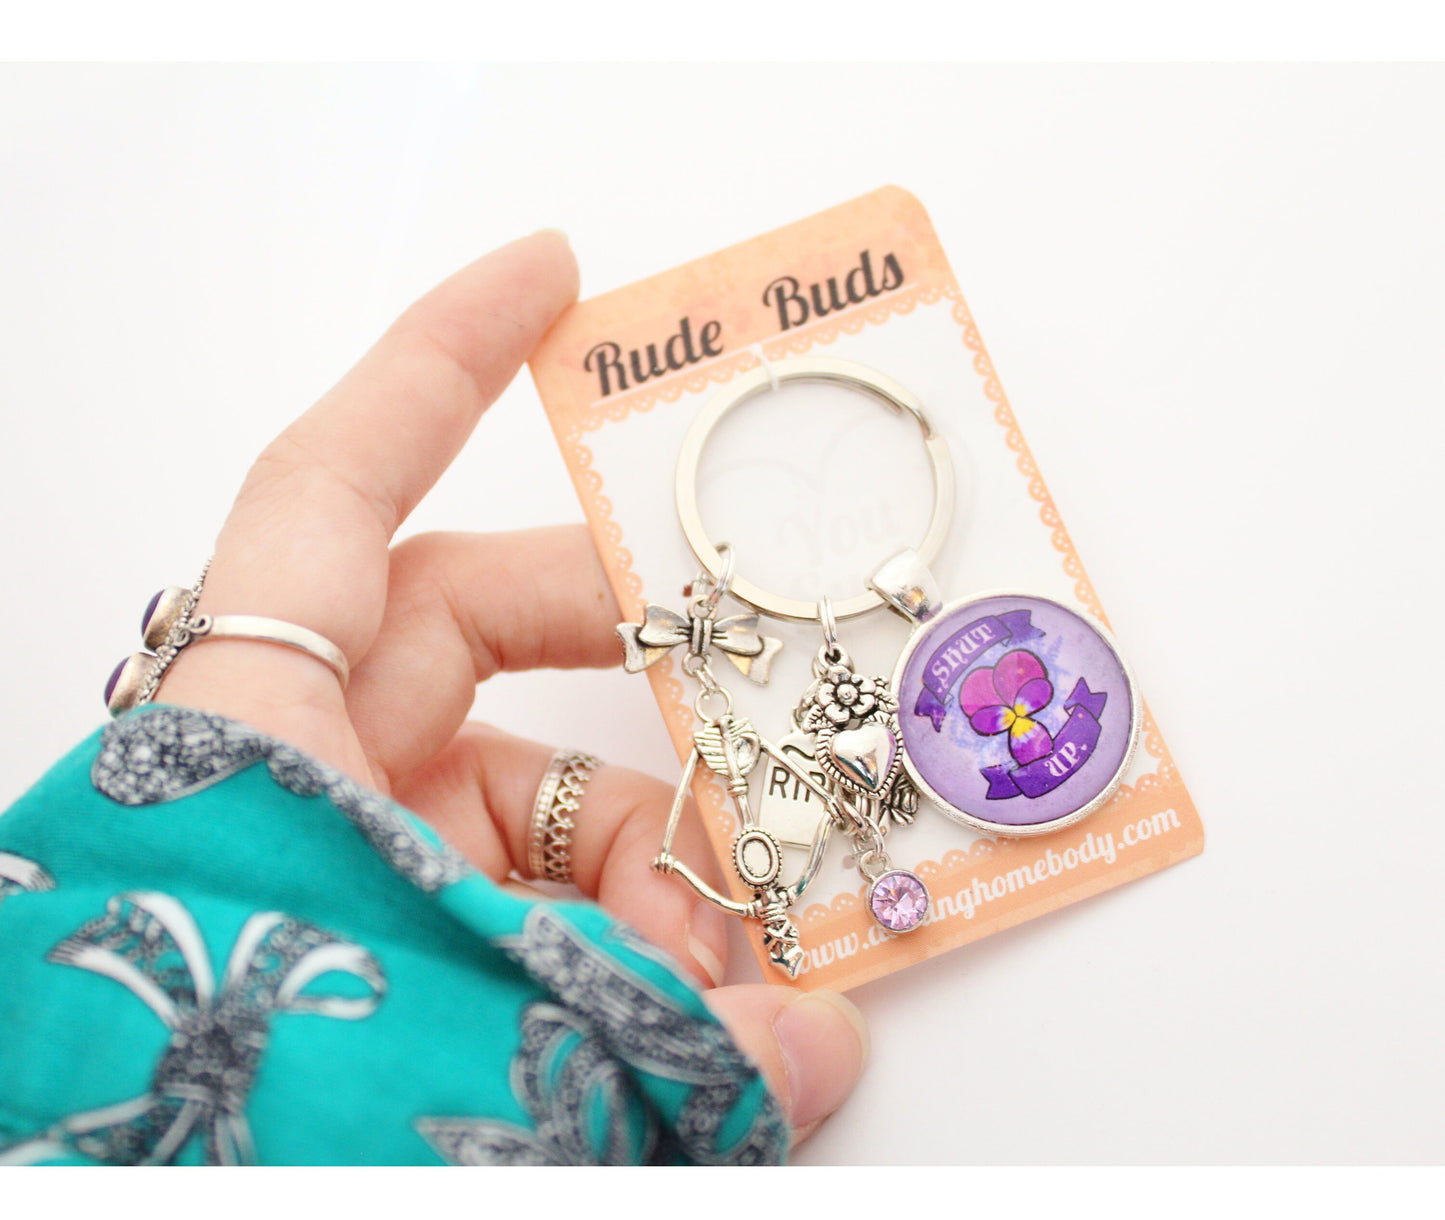 Shut Up Rude Buds Key Chain. Flower Sarcastic Keychains for Women. Bag Accessories. Floral Pastel Punk Keychain Charm. Gift for Car Keys.